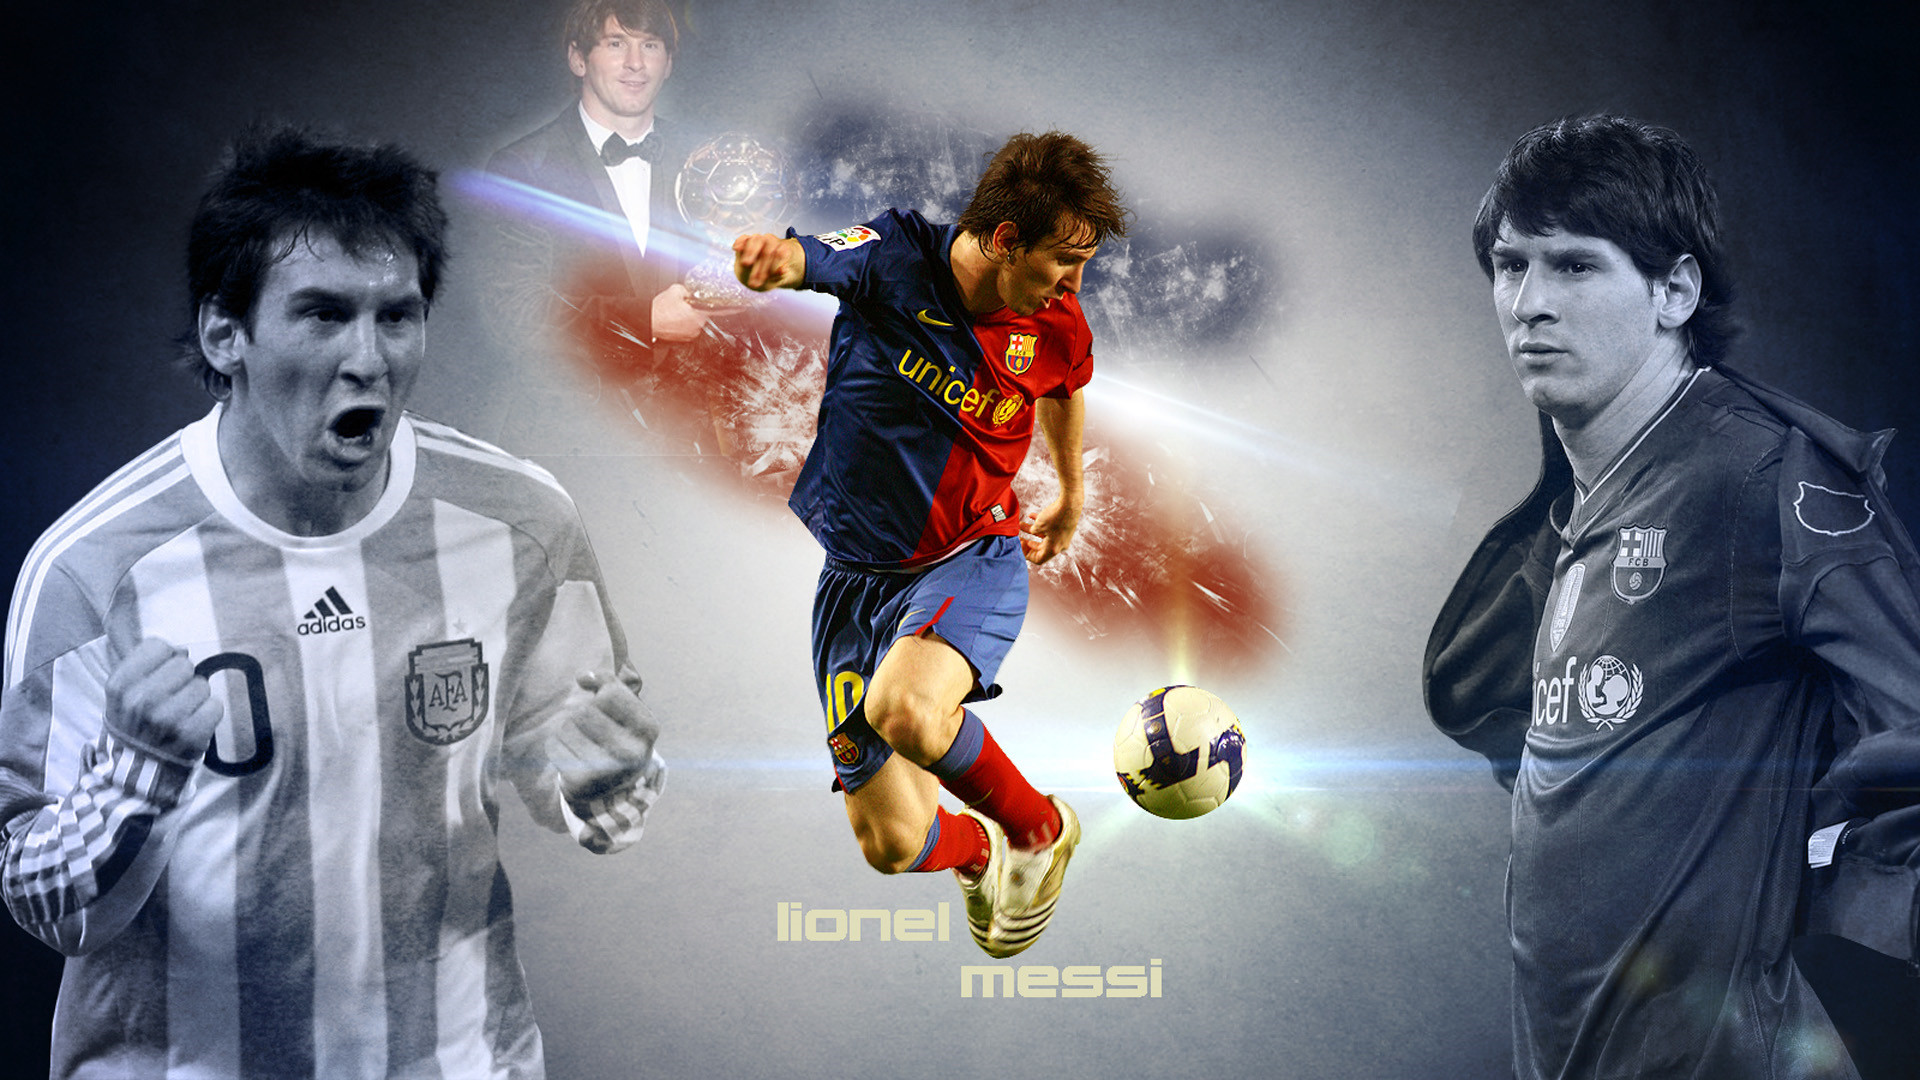 1920x1080 Messi Football Wallpapers HD free download.